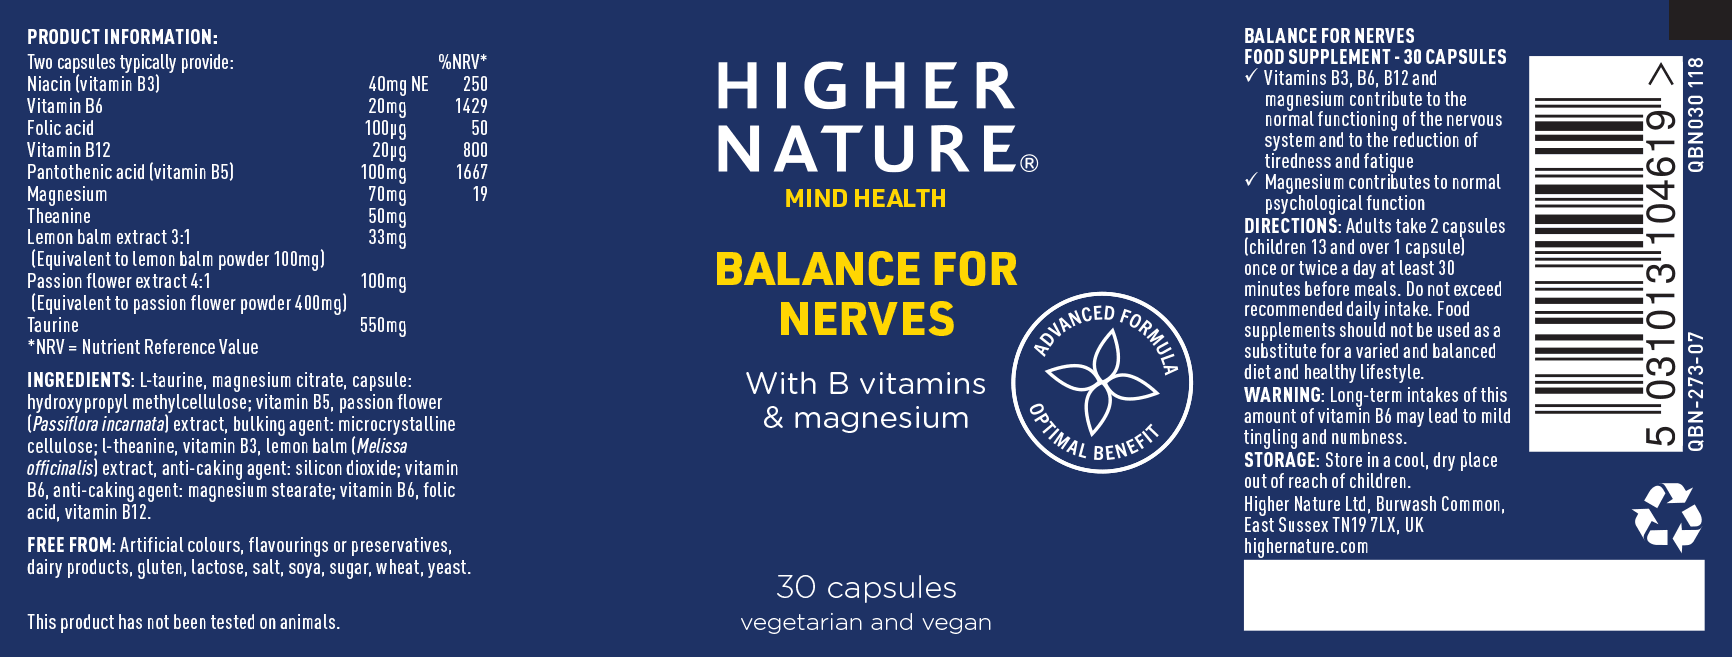 Higher Nature Balance for Nerves 30's - Approved Vitamins